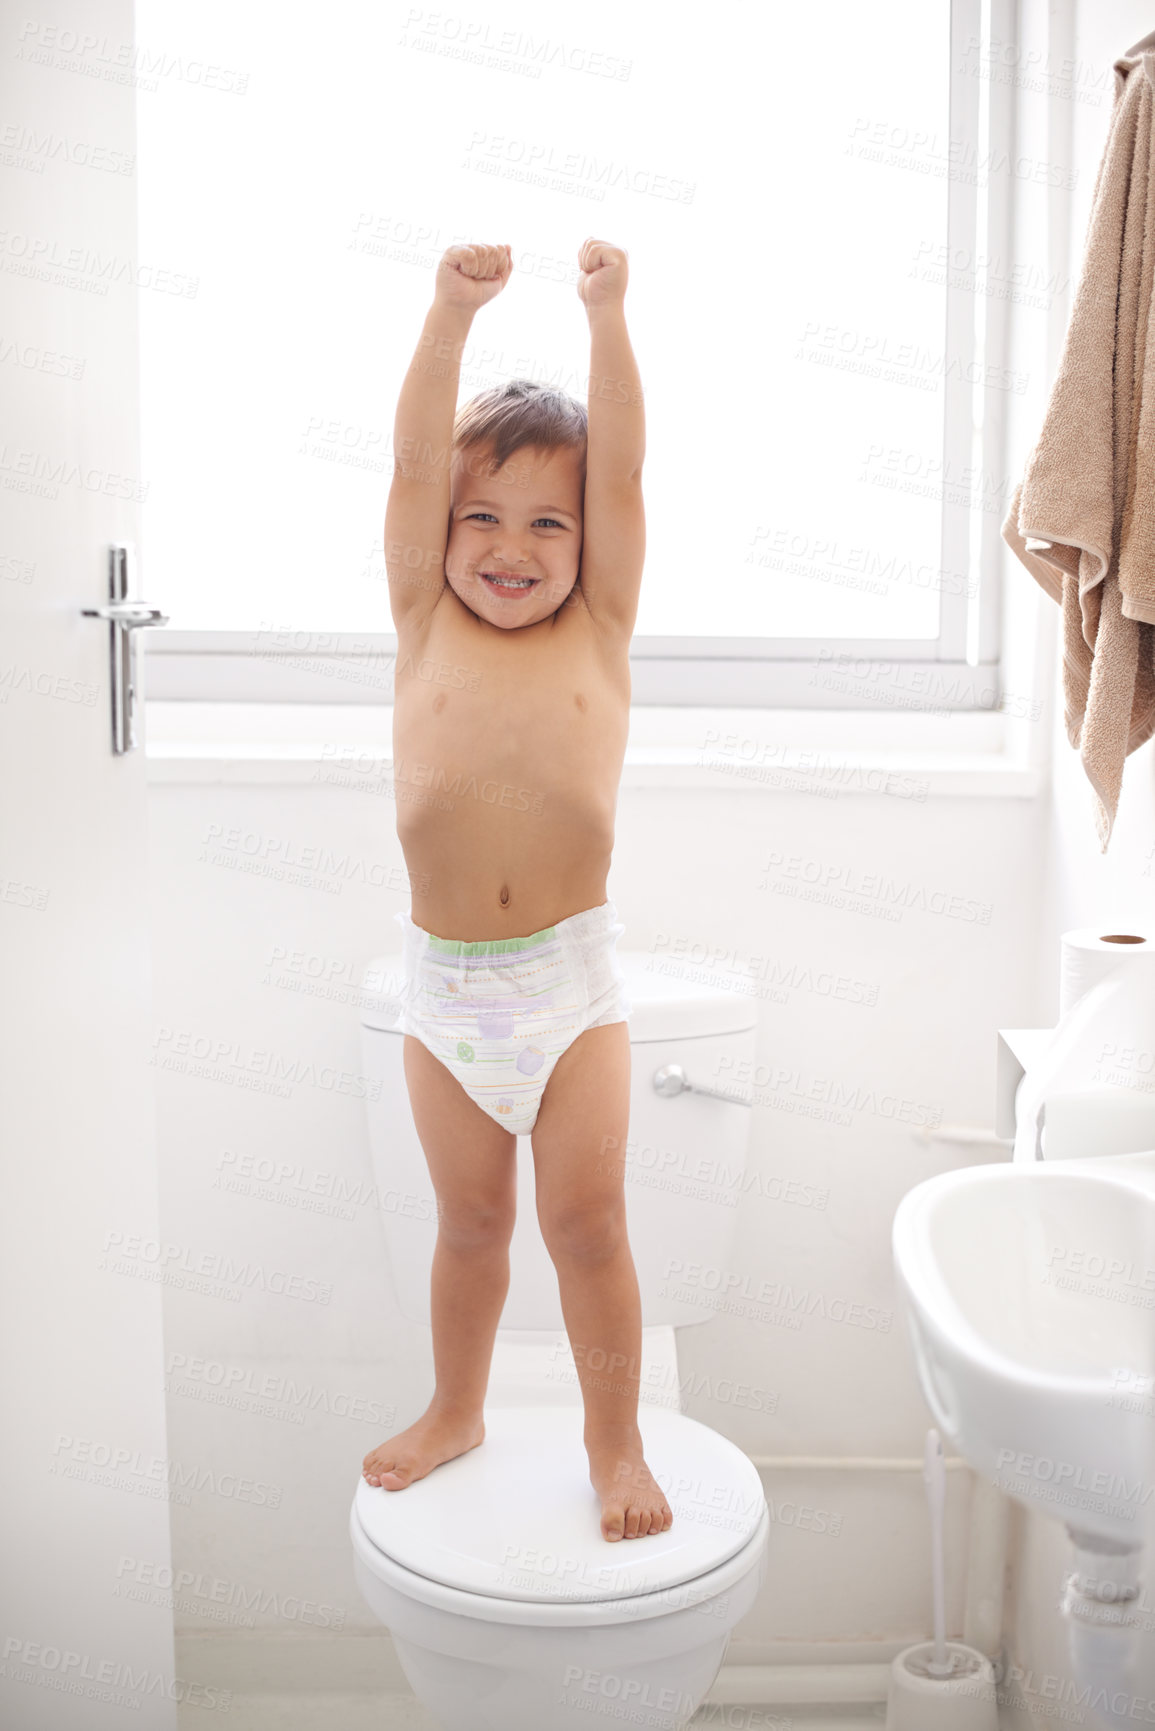 Buy stock photo Shot of a happy young boy in a diaper standing on a toilet seat